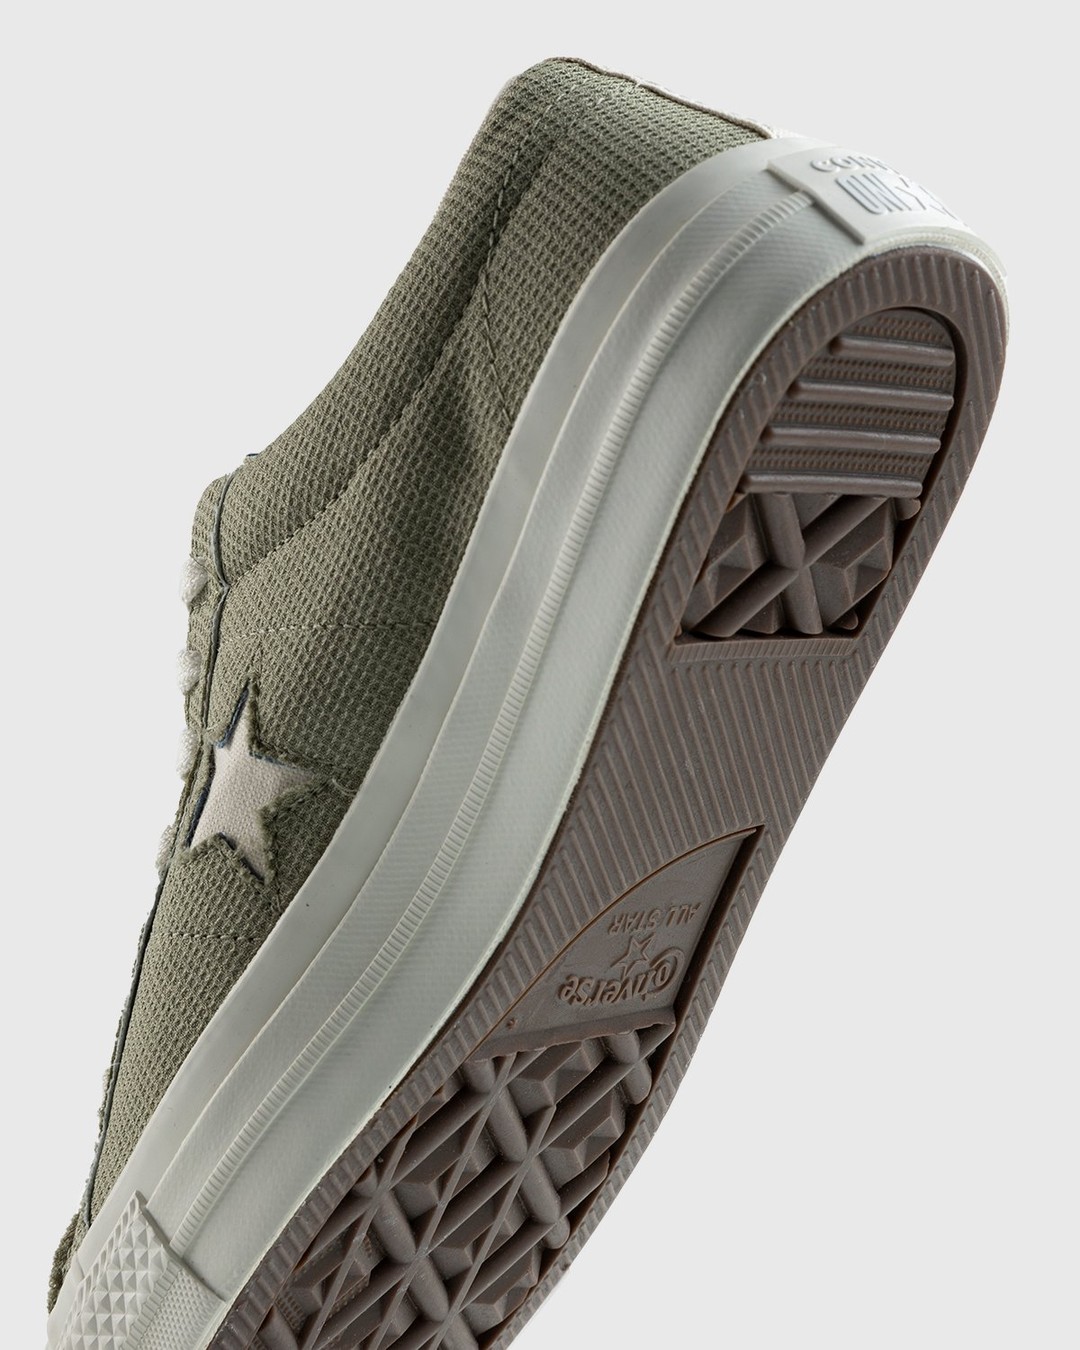 Converse – One Star Ox Indigo/Obsidian/Egret - Low Top Sneakers - Green - Image 6